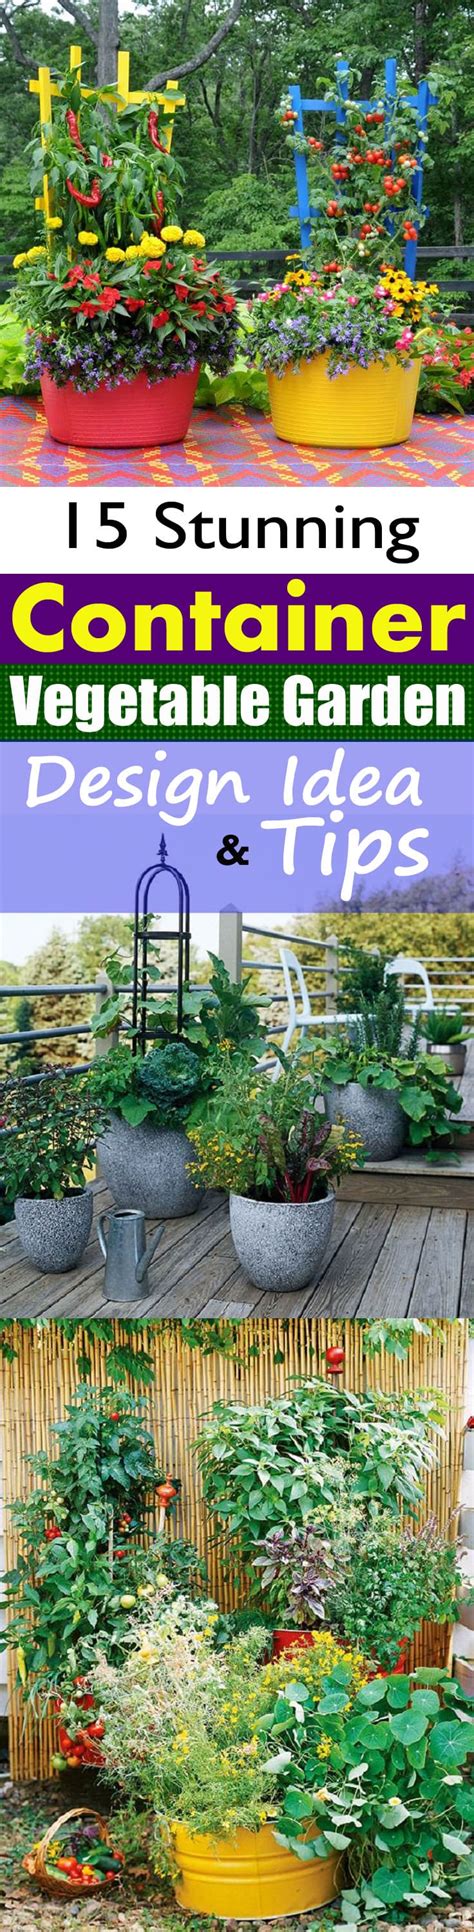 Then these 5 practical vegetable garden layout tips and ideas will hep you. 15 Stunning Container Vegetable Garden Design Ideas & Tips ...